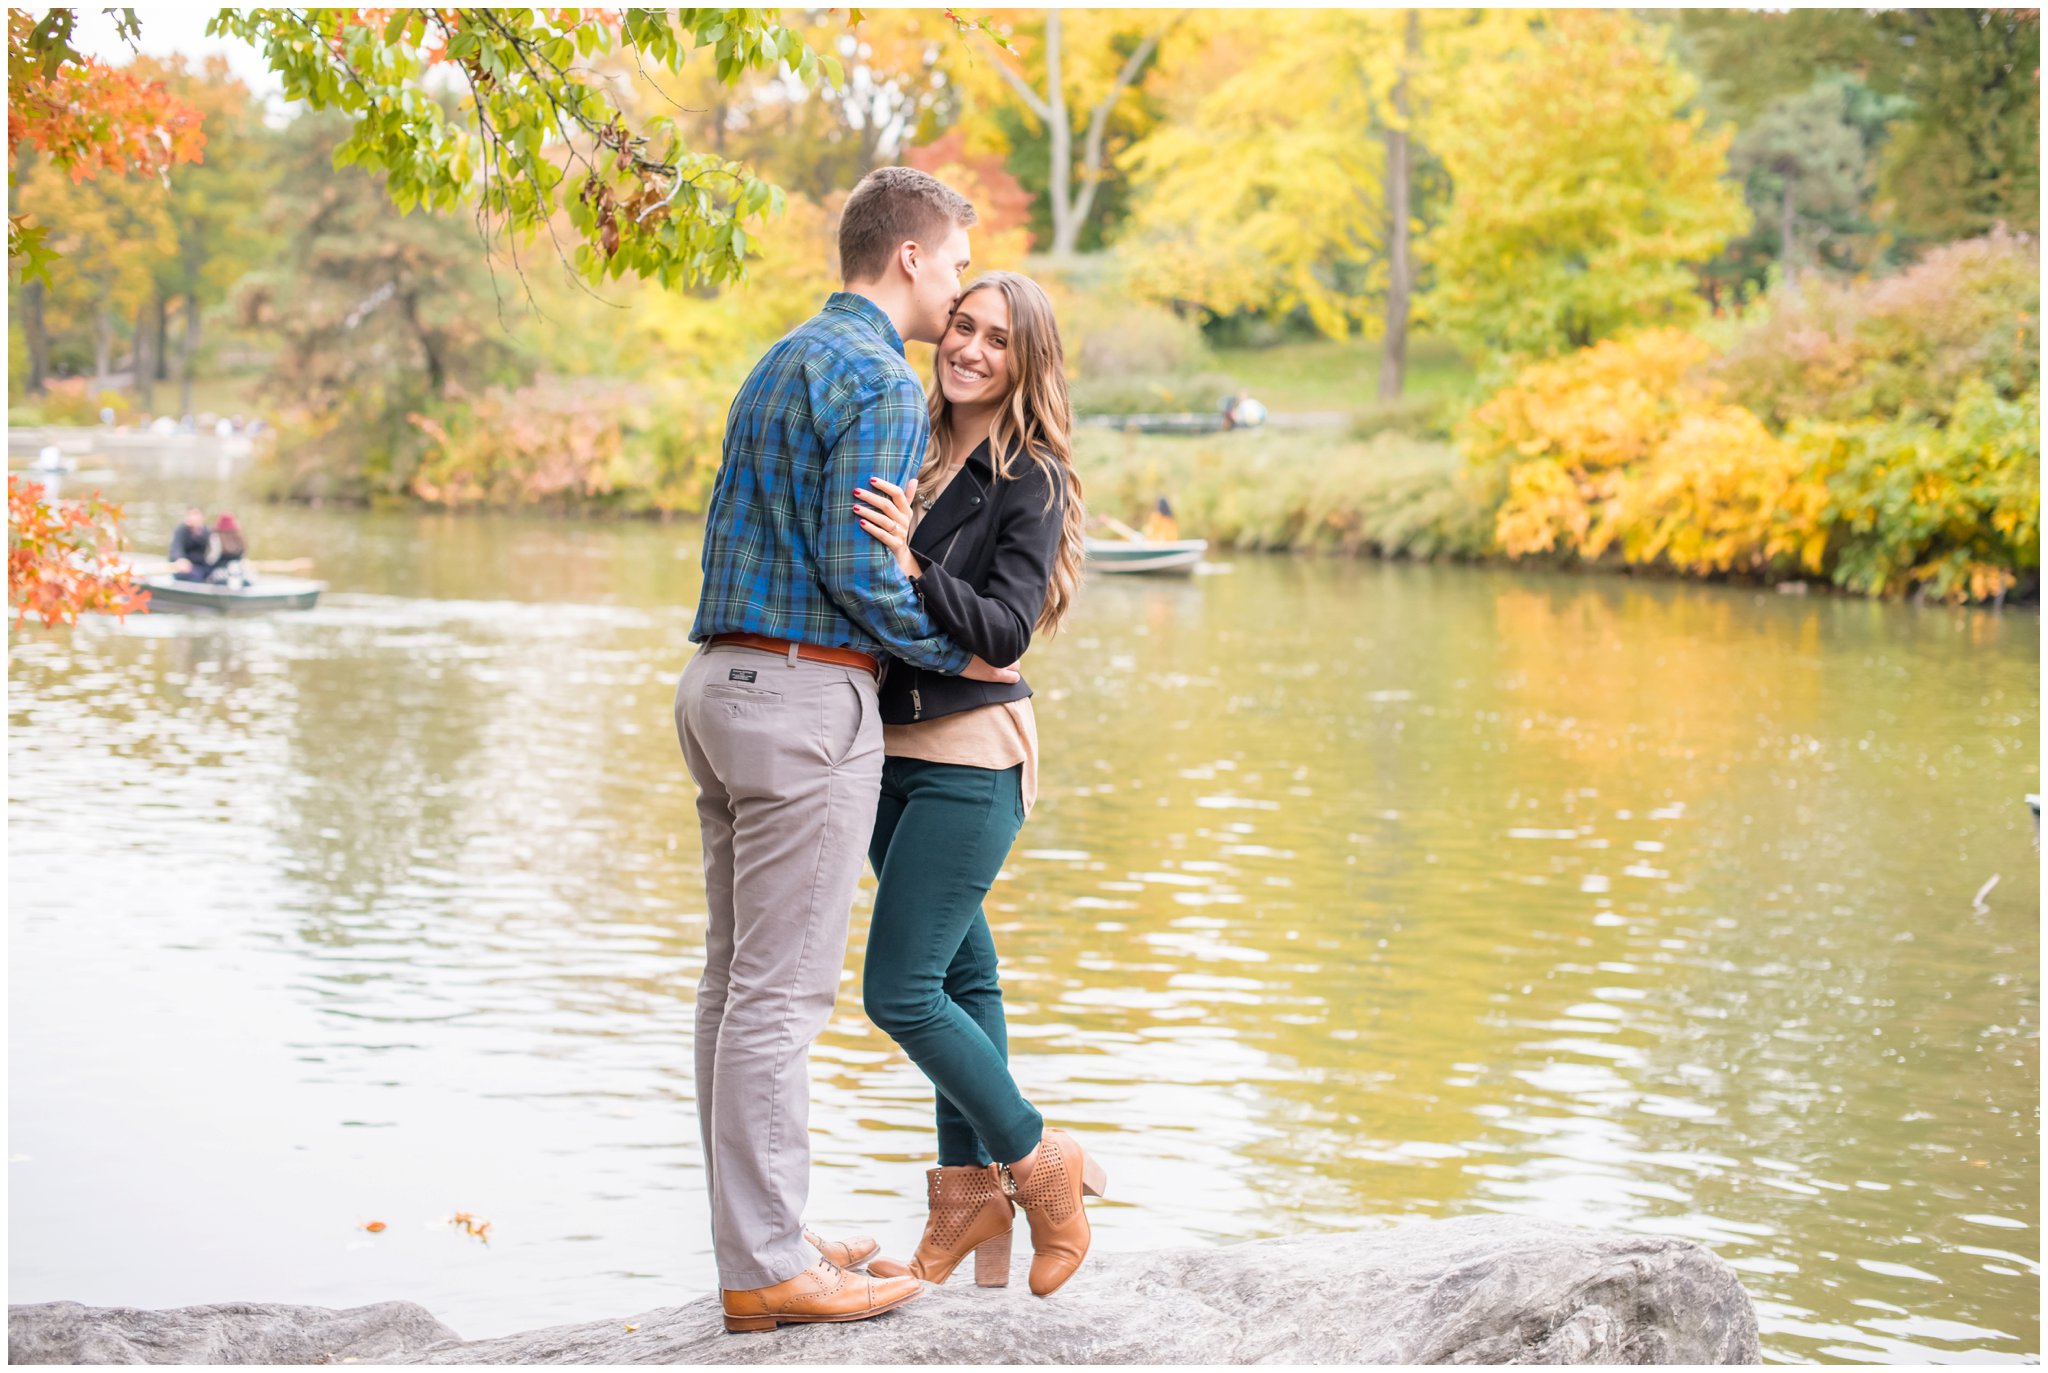 Laura Lee Photography_ Best of 2015 Engagements_0019